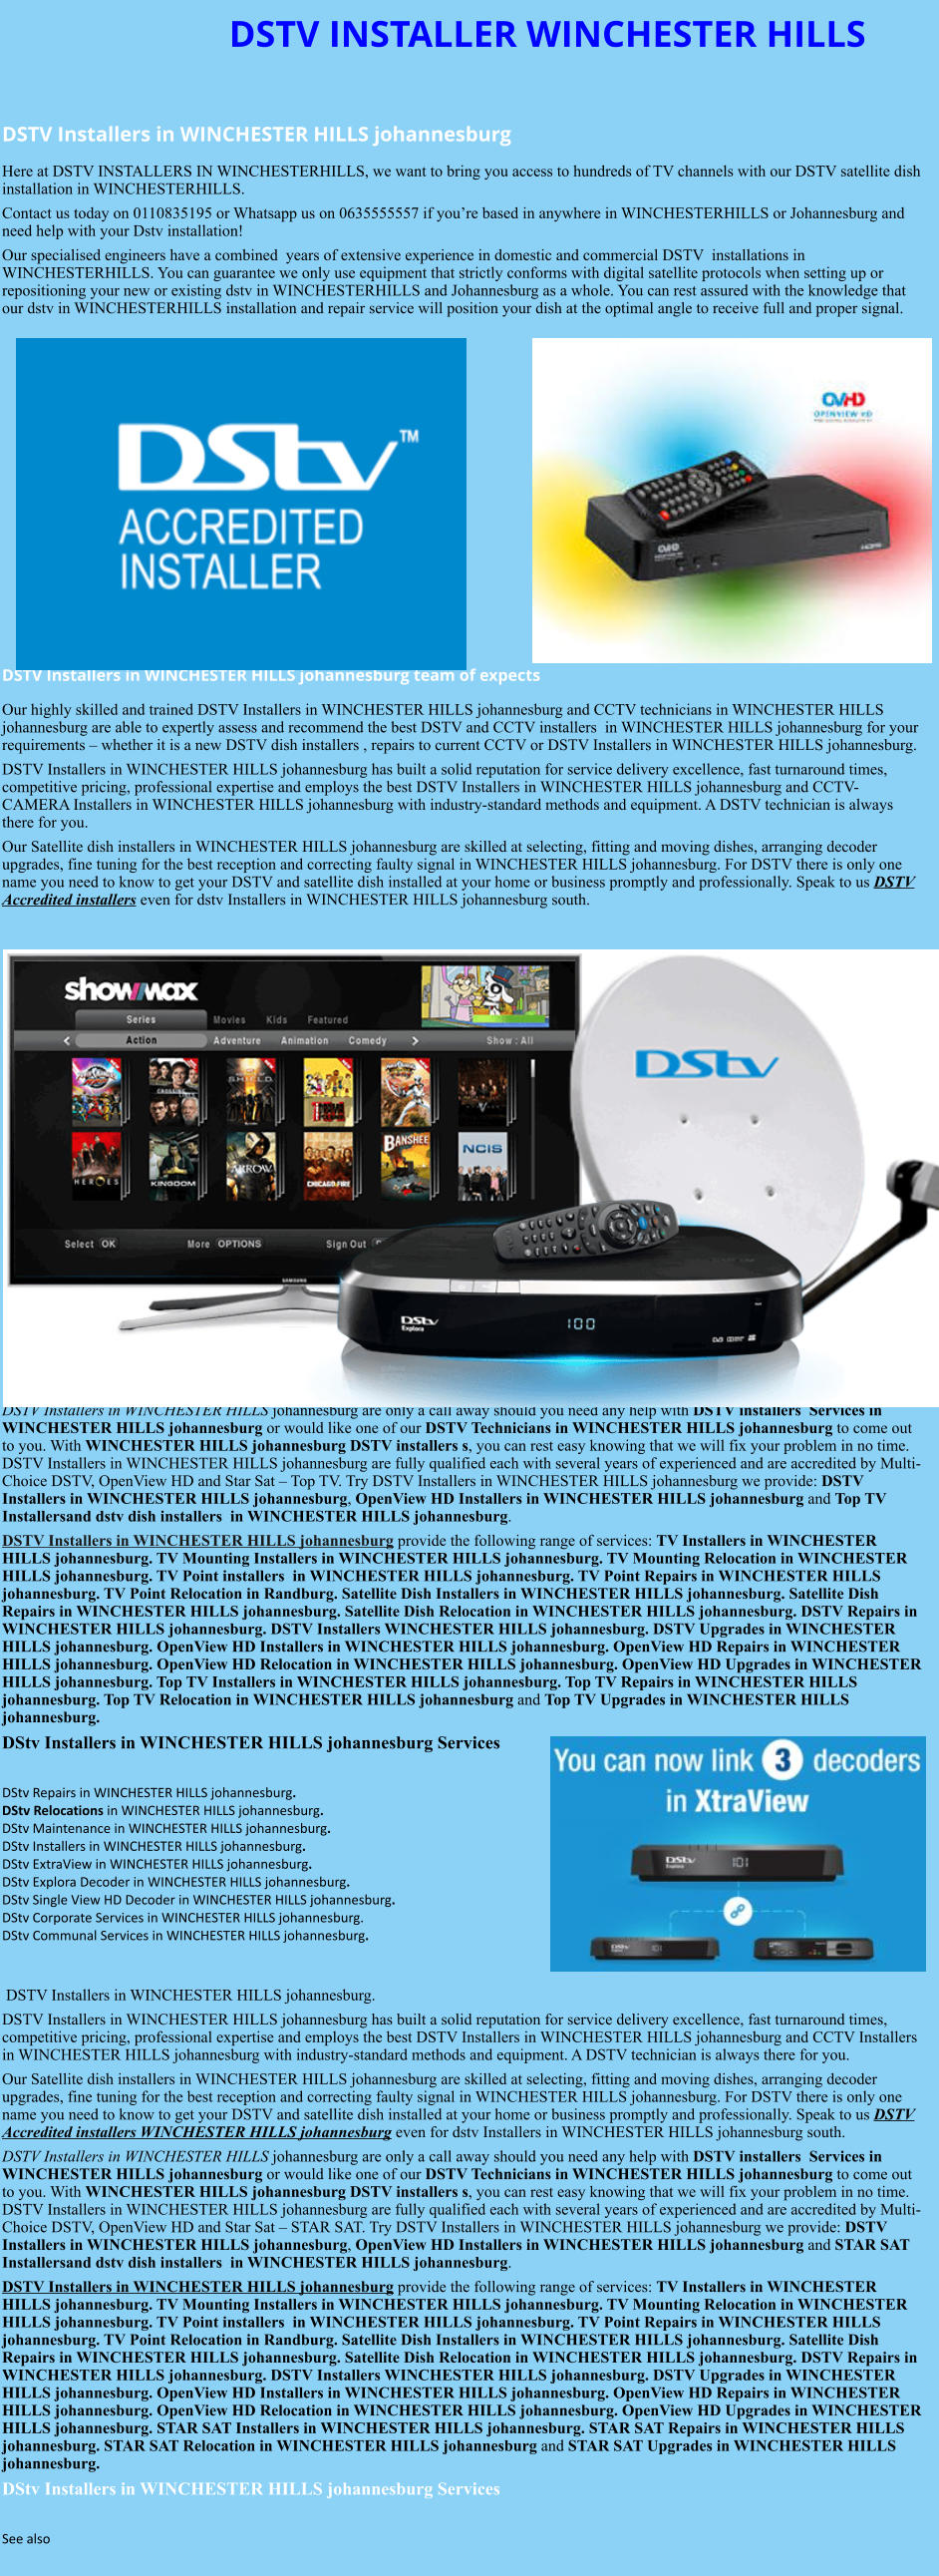 DSTV INSTALLER WINCHESTER HILLS  DSTV Installers in WINCHESTER HILLS johannesburg  Here at DSTV INSTALLERS IN WINCHESTERHILLS, we want to bring you access to hundreds of TV channels with our DSTV satellite dish installation in WINCHESTERHILLS. Contact us today on 0110835195 or Whatsapp us on 0635555557 if you’re based in anywhere in WINCHESTERHILLS or Johannesburg and need help with your Dstv installation! Our specialised engineers have a combined  years of extensive experience in domestic and commercial DSTV  installations in WINCHESTERHILLS. You can guarantee we only use equipment that strictly conforms with digital satellite protocols when setting up or repositioning your new or existing dstv in WINCHESTERHILLS and Johannesburg as a whole. You can rest assured with the knowledge that our dstv in WINCHESTERHILLS installation and repair service will position your dish at the optimal angle to receive full and proper signal.               DSTV Installers in WINCHESTER HILLS johannesburg team of expects Our highly skilled and trained DSTV Installers in WINCHESTER HILLS johannesburg and CCTV technicians in WINCHESTER HILLS johannesburg are able to expertly assess and recommend the best DSTV and CCTV installers  in WINCHESTER HILLS johannesburg for your requirements – whether it is a new DSTV dish installers , repairs to current CCTV or DSTV Installers in WINCHESTER HILLS johannesburg. DSTV Installers in WINCHESTER HILLS johannesburg has built a solid reputation for service delivery excellence, fast turnaround times, competitive pricing, professional expertise and employs the best DSTV Installers in WINCHESTER HILLS johannesburg and CCTV-CAMERA Installers in WINCHESTER HILLS johannesburg with industry-standard methods and equipment. A DSTV technician is always there for you. Our Satellite dish installers in WINCHESTER HILLS johannesburg are skilled at selecting, fitting and moving dishes, arranging decoder upgrades, fine tuning for the best reception and correcting faulty signal in WINCHESTER HILLS johannesburg. For DSTV there is only one name you need to know to get your DSTV and satellite dish installed at your home or business promptly and professionally. Speak to us DSTV Accredited installers even for dstv Installers in WINCHESTER HILLS johannesburg south.                     DSTV Installers in WINCHESTER HILLS johannesburg are only a call away should you need any help with DSTV installers  Services in WINCHESTER HILLS johannesburg or would like one of our DSTV Technicians in WINCHESTER HILLS johannesburg to come out to you. With WINCHESTER HILLS johannesburg DSTV installers s, you can rest easy knowing that we will fix your problem in no time. DSTV Installers in WINCHESTER HILLS johannesburg are fully qualified each with several years of experienced and are accredited by Multi-Choice DSTV, OpenView HD and Star Sat – Top TV. Try DSTV Installers in WINCHESTER HILLS johannesburg we provide: DSTV Installers in WINCHESTER HILLS johannesburg, OpenView HD Installers in WINCHESTER HILLS johannesburg and Top TV Installersand dstv dish installers  in WINCHESTER HILLS johannesburg. DSTV Installers in WINCHESTER HILLS johannesburg provide the following range of services: TV Installers in WINCHESTER HILLS johannesburg. TV Mounting Installers in WINCHESTER HILLS johannesburg. TV Mounting Relocation in WINCHESTER HILLS johannesburg. TV Point installers  in WINCHESTER HILLS johannesburg. TV Point Repairs in WINCHESTER HILLS johannesburg. TV Point Relocation in Randburg. Satellite Dish Installers in WINCHESTER HILLS johannesburg. Satellite Dish Repairs in WINCHESTER HILLS johannesburg. Satellite Dish Relocation in WINCHESTER HILLS johannesburg. DSTV Repairs in WINCHESTER HILLS johannesburg. DSTV Installers WINCHESTER HILLS johannesburg. DSTV Upgrades in WINCHESTER HILLS johannesburg. OpenView HD Installers in WINCHESTER HILLS johannesburg. OpenView HD Repairs in WINCHESTER HILLS johannesburg. OpenView HD Relocation in WINCHESTER HILLS johannesburg. OpenView HD Upgrades in WINCHESTER HILLS johannesburg. Top TV Installers in WINCHESTER HILLS johannesburg. Top TV Repairs in WINCHESTER HILLS johannesburg. Top TV Relocation in WINCHESTER HILLS johannesburg and Top TV Upgrades in WINCHESTER HILLS johannesburg. DStv Installers in WINCHESTER HILLS johannesburg Services  DStv Repairs in WINCHESTER HILLS johannesburg.  DStv Relocations in WINCHESTER HILLS johannesburg.  DStv Maintenance in WINCHESTER HILLS johannesburg. DStv Installers in WINCHESTER HILLS johannesburg. DStv ExtraView in WINCHESTER HILLS johannesburg. DStv Explora Decoder in WINCHESTER HILLS johannesburg. DStv Single View HD Decoder in WINCHESTER HILLS johannesburg. DStv Corporate Services in WINCHESTER HILLS johannesburg. DStv Communal Services in WINCHESTER HILLS johannesburg.    DSTV Installers in WINCHESTER HILLS johannesburg. DSTV Installers in WINCHESTER HILLS johannesburg has built a solid reputation for service delivery excellence, fast turnaround times, competitive pricing, professional expertise and employs the best DSTV Installers in WINCHESTER HILLS johannesburg and CCTV Installers in WINCHESTER HILLS johannesburg with industry-standard methods and equipment. A DSTV technician is always there for you. Our Satellite dish installers in WINCHESTER HILLS johannesburg are skilled at selecting, fitting and moving dishes, arranging decoder upgrades, fine tuning for the best reception and correcting faulty signal in WINCHESTER HILLS johannesburg. For DSTV there is only one name you need to know to get your DSTV and satellite dish installed at your home or business promptly and professionally. Speak to us DSTV Accredited installers WINCHESTER HILLS johannesburg even for dstv Installers in WINCHESTER HILLS johannesburg south. DSTV Installers in WINCHESTER HILLS johannesburg are only a call away should you need any help with DSTV installers  Services in WINCHESTER HILLS johannesburg or would like one of our DSTV Technicians in WINCHESTER HILLS johannesburg to come out to you. With WINCHESTER HILLS johannesburg DSTV installers s, you can rest easy knowing that we will fix your problem in no time. DSTV Installers in WINCHESTER HILLS johannesburg are fully qualified each with several years of experienced and are accredited by Multi-Choice DSTV, OpenView HD and Star Sat – STAR SAT. Try DSTV Installers in WINCHESTER HILLS johannesburg we provide: DSTV Installers in WINCHESTER HILLS johannesburg, OpenView HD Installers in WINCHESTER HILLS johannesburg and STAR SAT Installersand dstv dish installers  in WINCHESTER HILLS johannesburg. DSTV Installers in WINCHESTER HILLS johannesburg provide the following range of services: TV Installers in WINCHESTER HILLS johannesburg. TV Mounting Installers in WINCHESTER HILLS johannesburg. TV Mounting Relocation in WINCHESTER HILLS johannesburg. TV Point installers  in WINCHESTER HILLS johannesburg. TV Point Repairs in WINCHESTER HILLS johannesburg. TV Point Relocation in Randburg. Satellite Dish Installers in WINCHESTER HILLS johannesburg. Satellite Dish Repairs in WINCHESTER HILLS johannesburg. Satellite Dish Relocation in WINCHESTER HILLS johannesburg. DSTV Repairs in WINCHESTER HILLS johannesburg. DSTV Installers WINCHESTER HILLS johannesburg. DSTV Upgrades in WINCHESTER HILLS johannesburg. OpenView HD Installers in WINCHESTER HILLS johannesburg. OpenView HD Repairs in WINCHESTER HILLS johannesburg. OpenView HD Relocation in WINCHESTER HILLS johannesburg. OpenView HD Upgrades in WINCHESTER HILLS johannesburg. STAR SAT Installers in WINCHESTER HILLS johannesburg. STAR SAT Repairs in WINCHESTER HILLS johannesburg. STAR SAT Relocation in WINCHESTER HILLS johannesburg and STAR SAT Upgrades in WINCHESTER HILLS johannesburg. DStv Installers in WINCHESTER HILLS johannesburg Services  See also